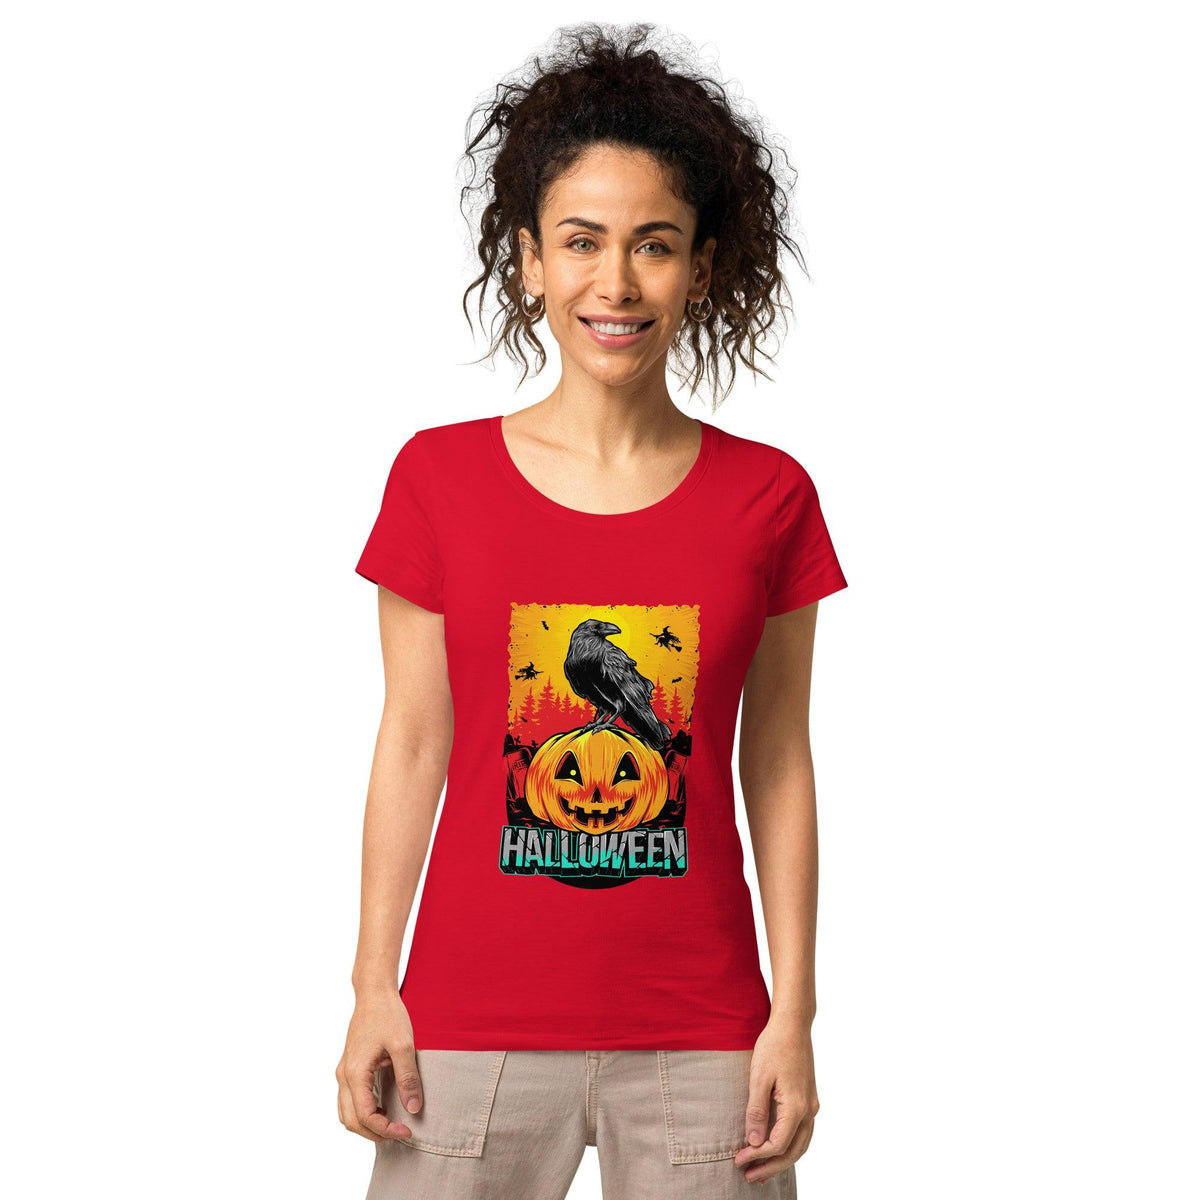 Elegant women's Halloween tee showcasing the phases of the moon, perfect for celestial admirers.